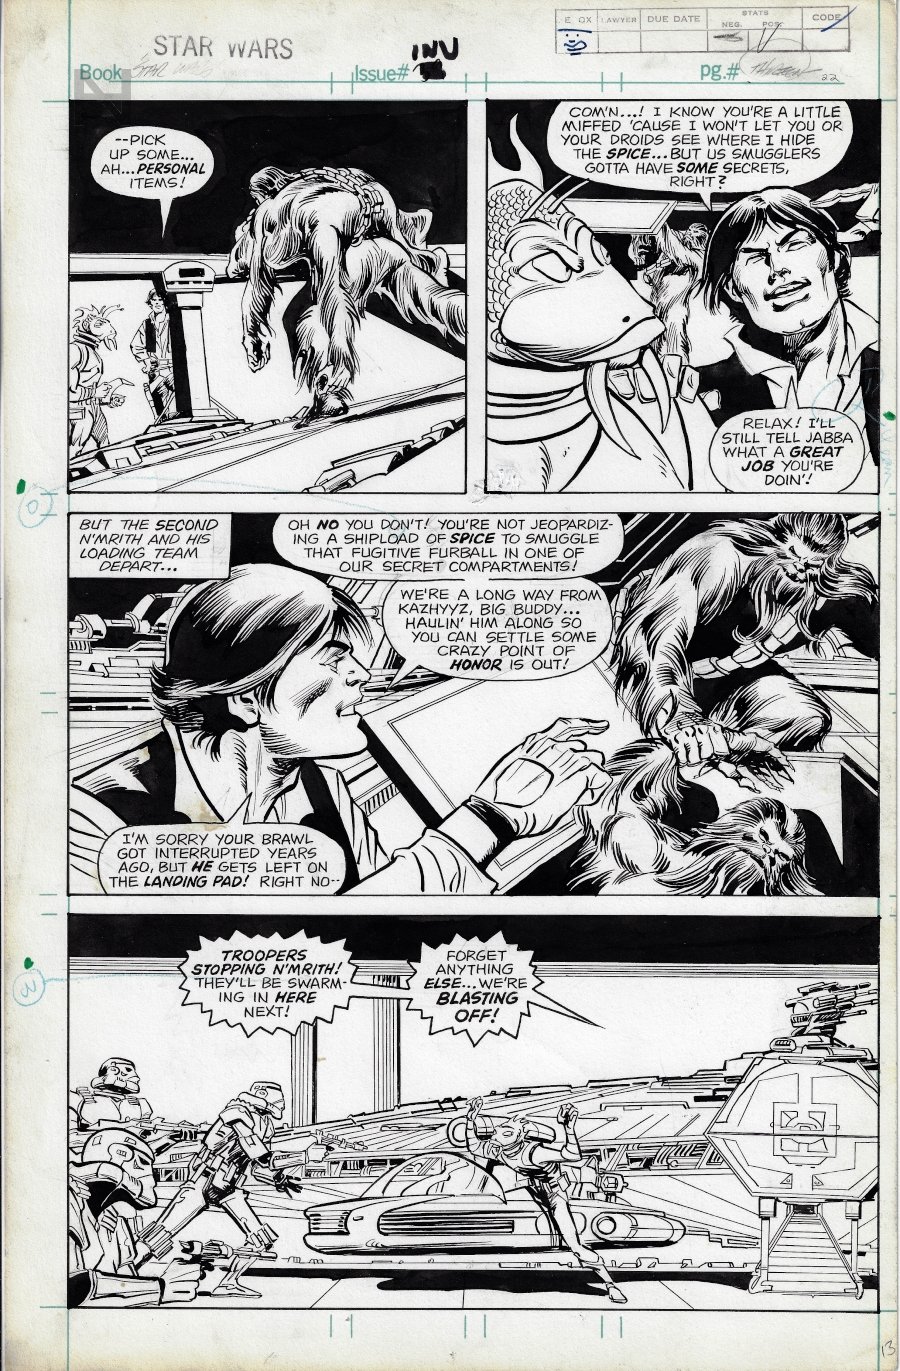 Star Wars Weekly 96 Page 2 By Carmine Infantino In Andrew Hanna S